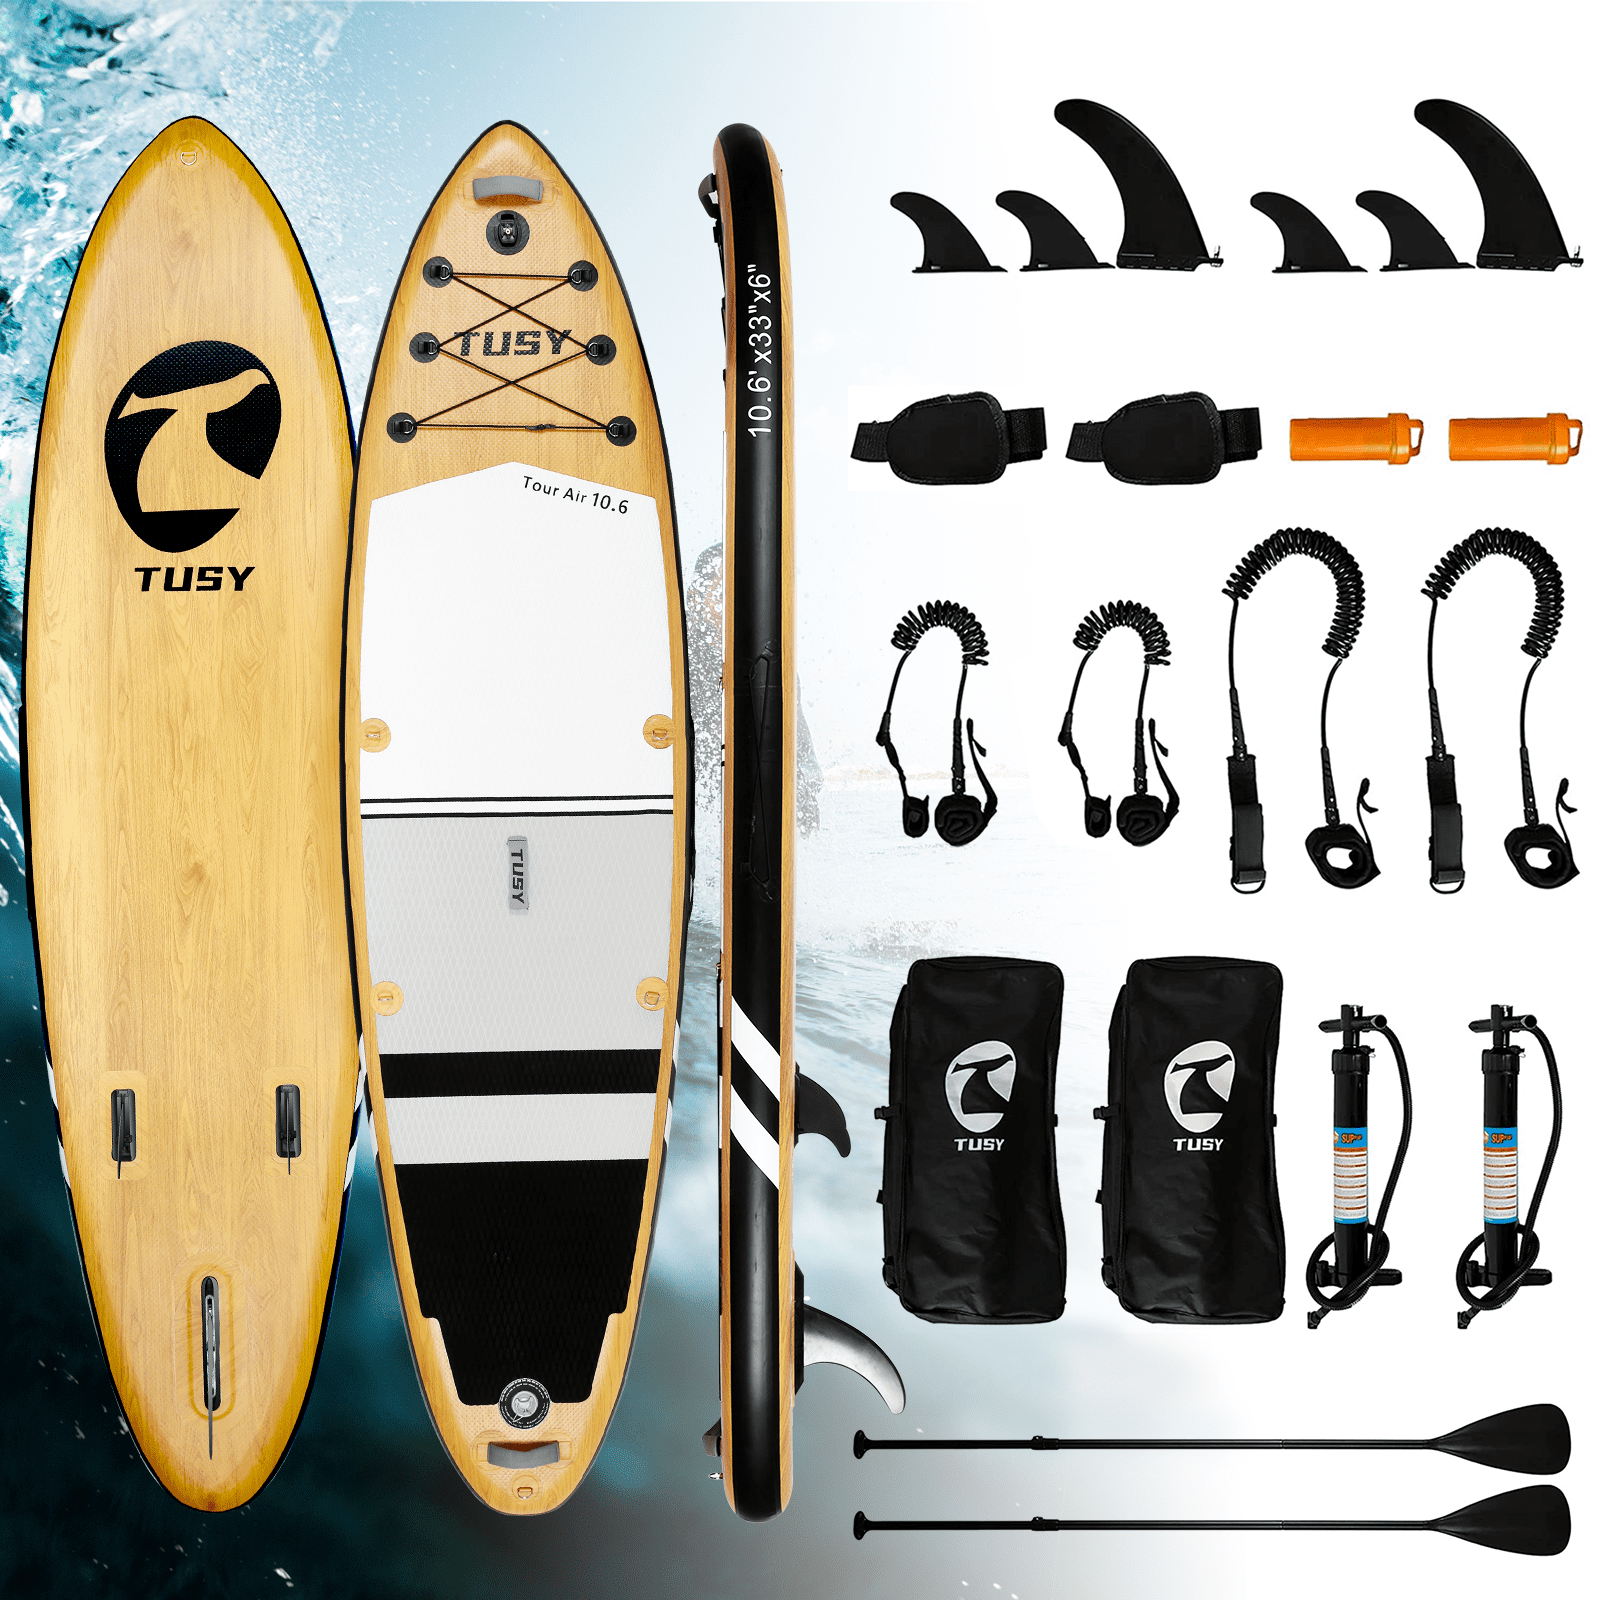 TUSY Inflatable Paddle Boards 10' Inflatable Paddleboards with All SUP Accessories Paddle, Hand Pump, Carry Bag, Drop Stitch, Traveling Board for Surfing